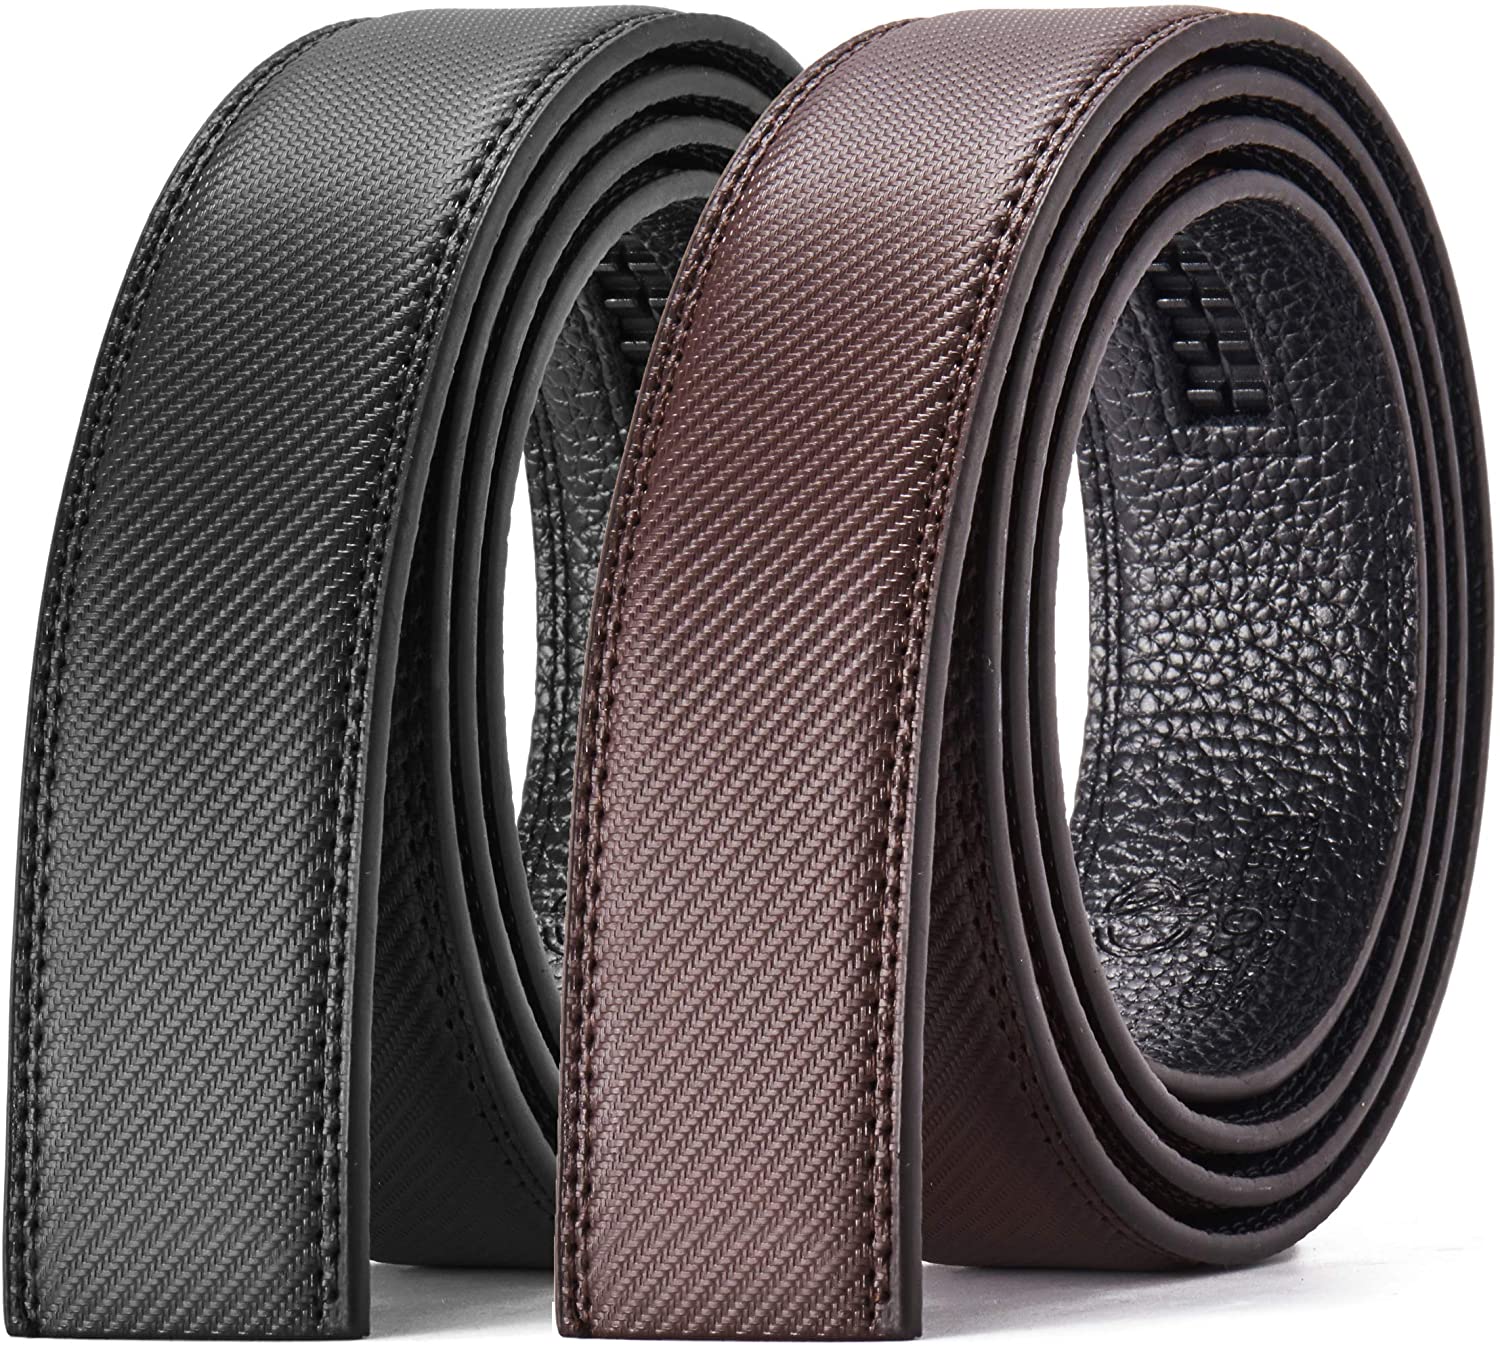 CHAOREN Ratchet Belt Replacement Strap 1 3/8”, Leather Belt Strap for ...